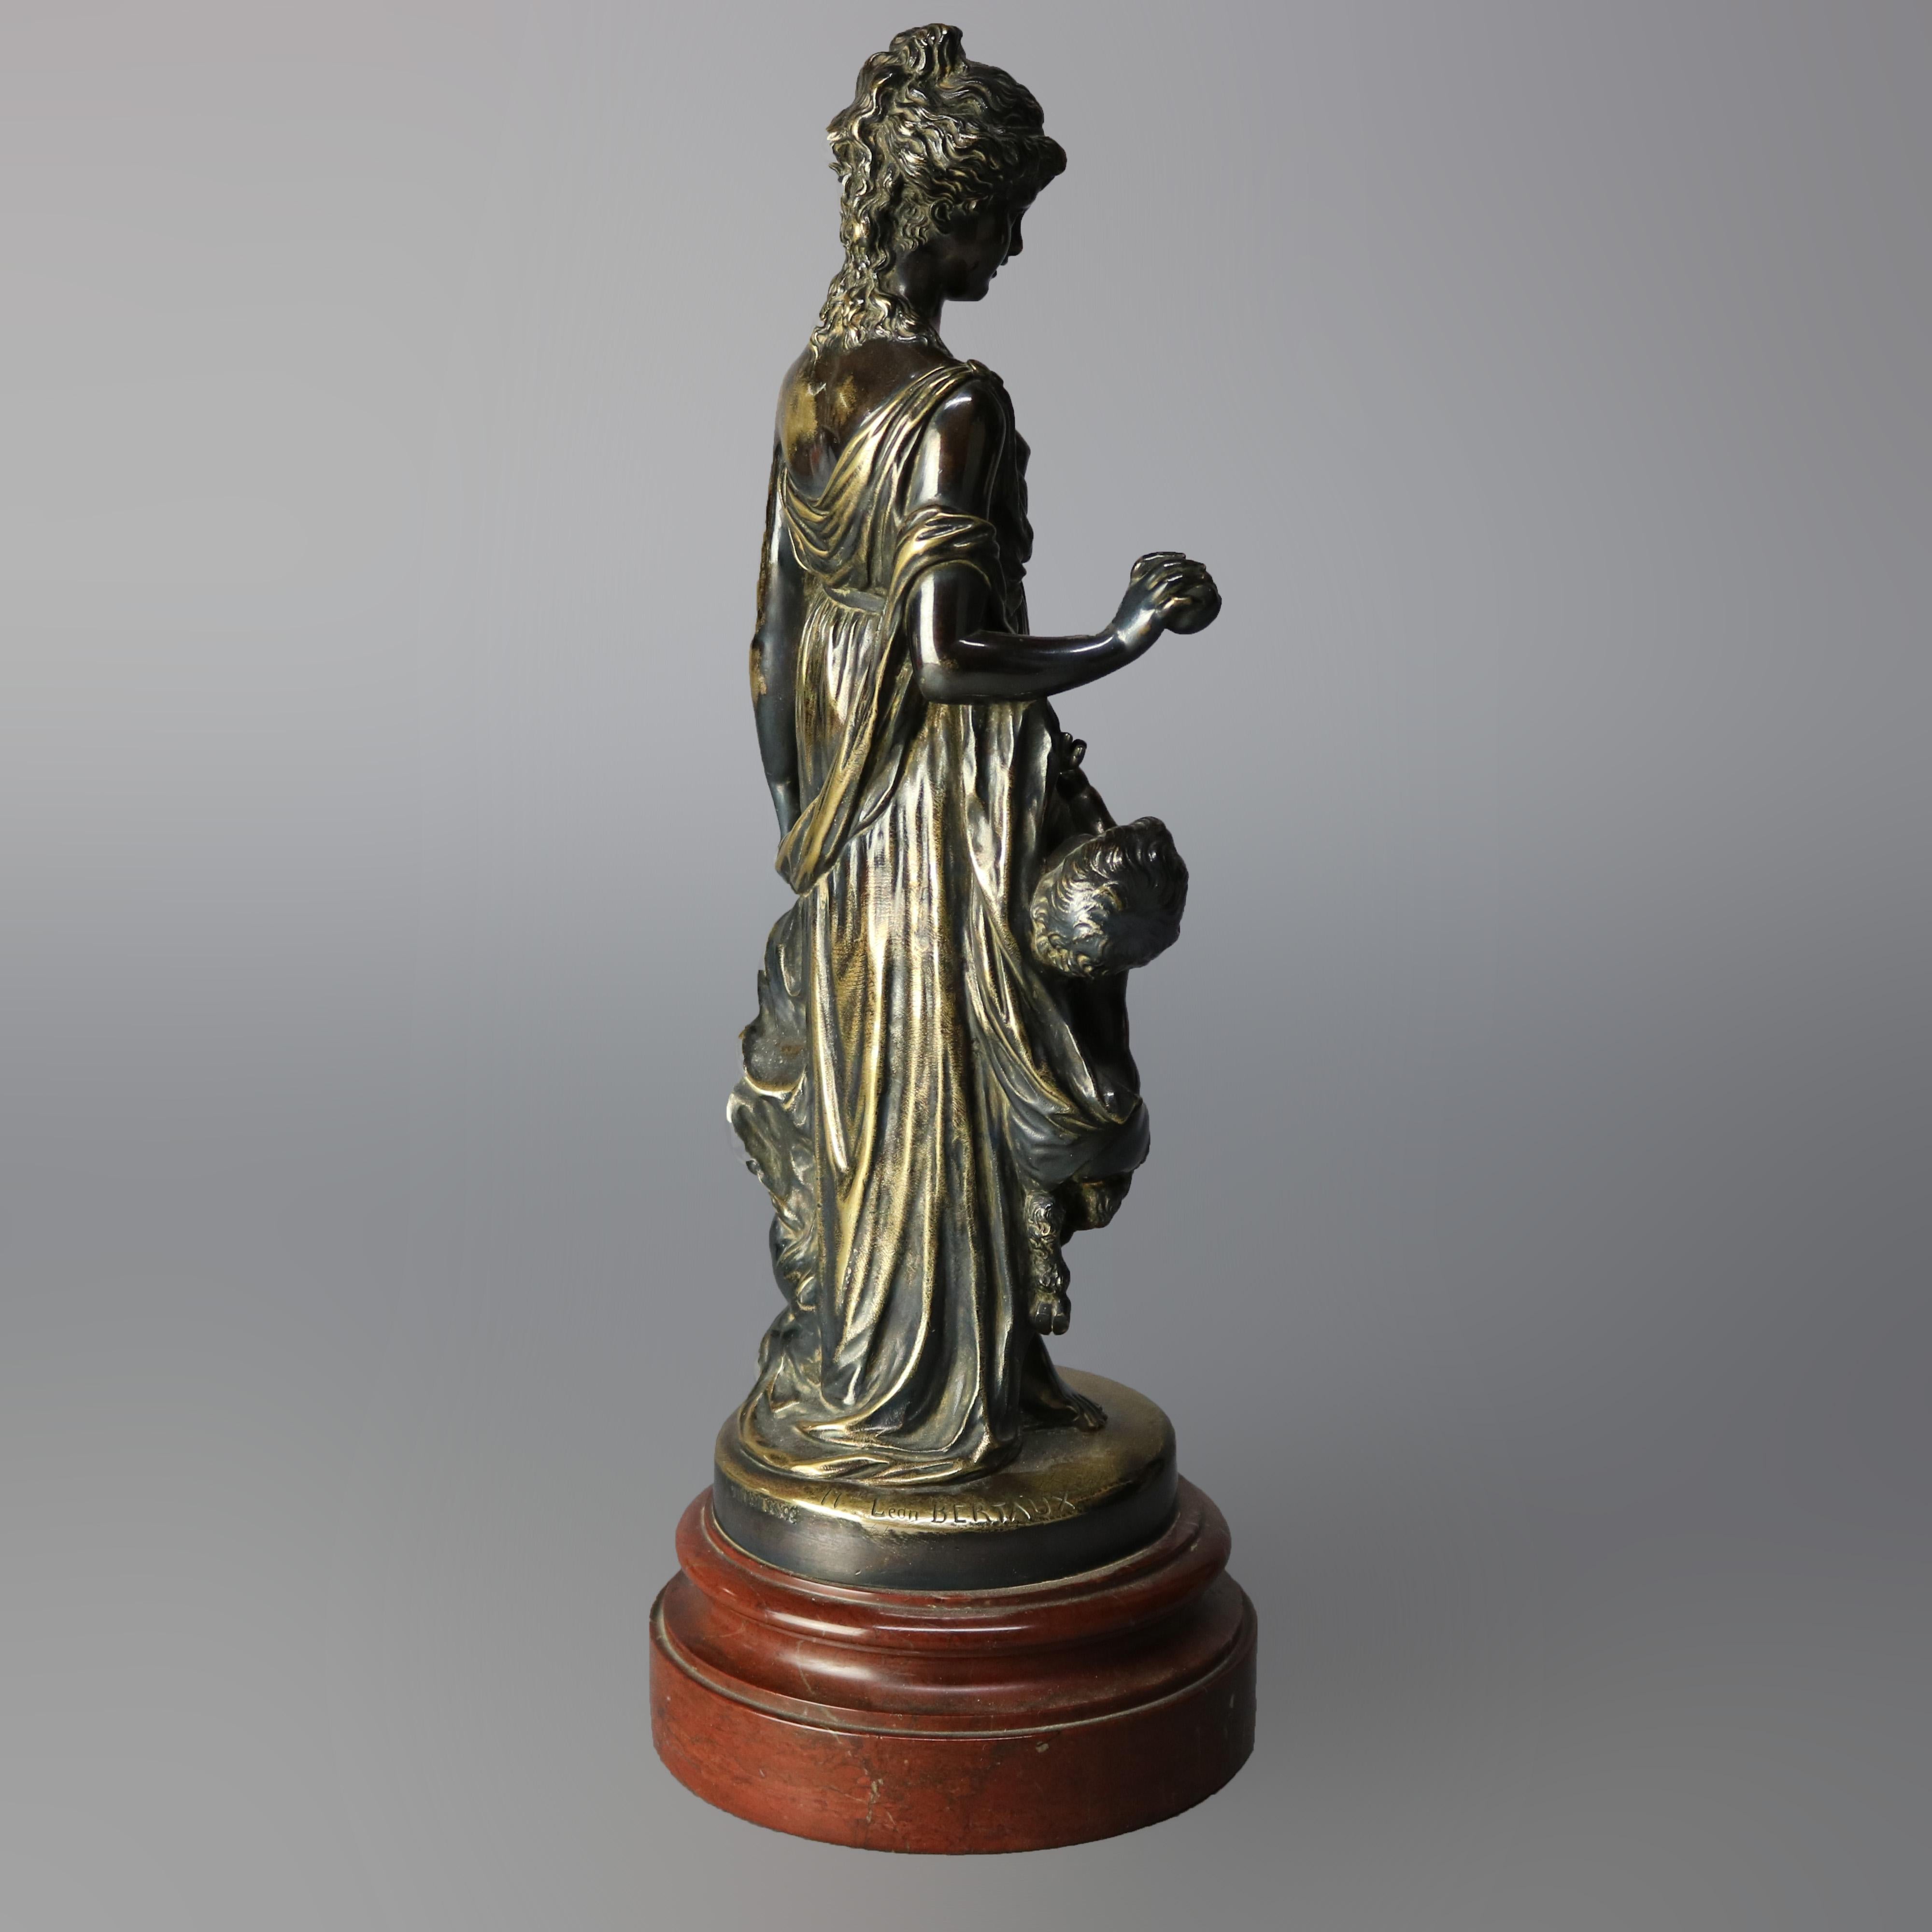 An antique classical Greek bronze sculpture by Leon Bertaux (France, 1825-1901) for Tiffany & Co. depicts woman with children or Greek goddess with putti, seated on marble plinth, signed as photographed, circa 1890

Measures: 14